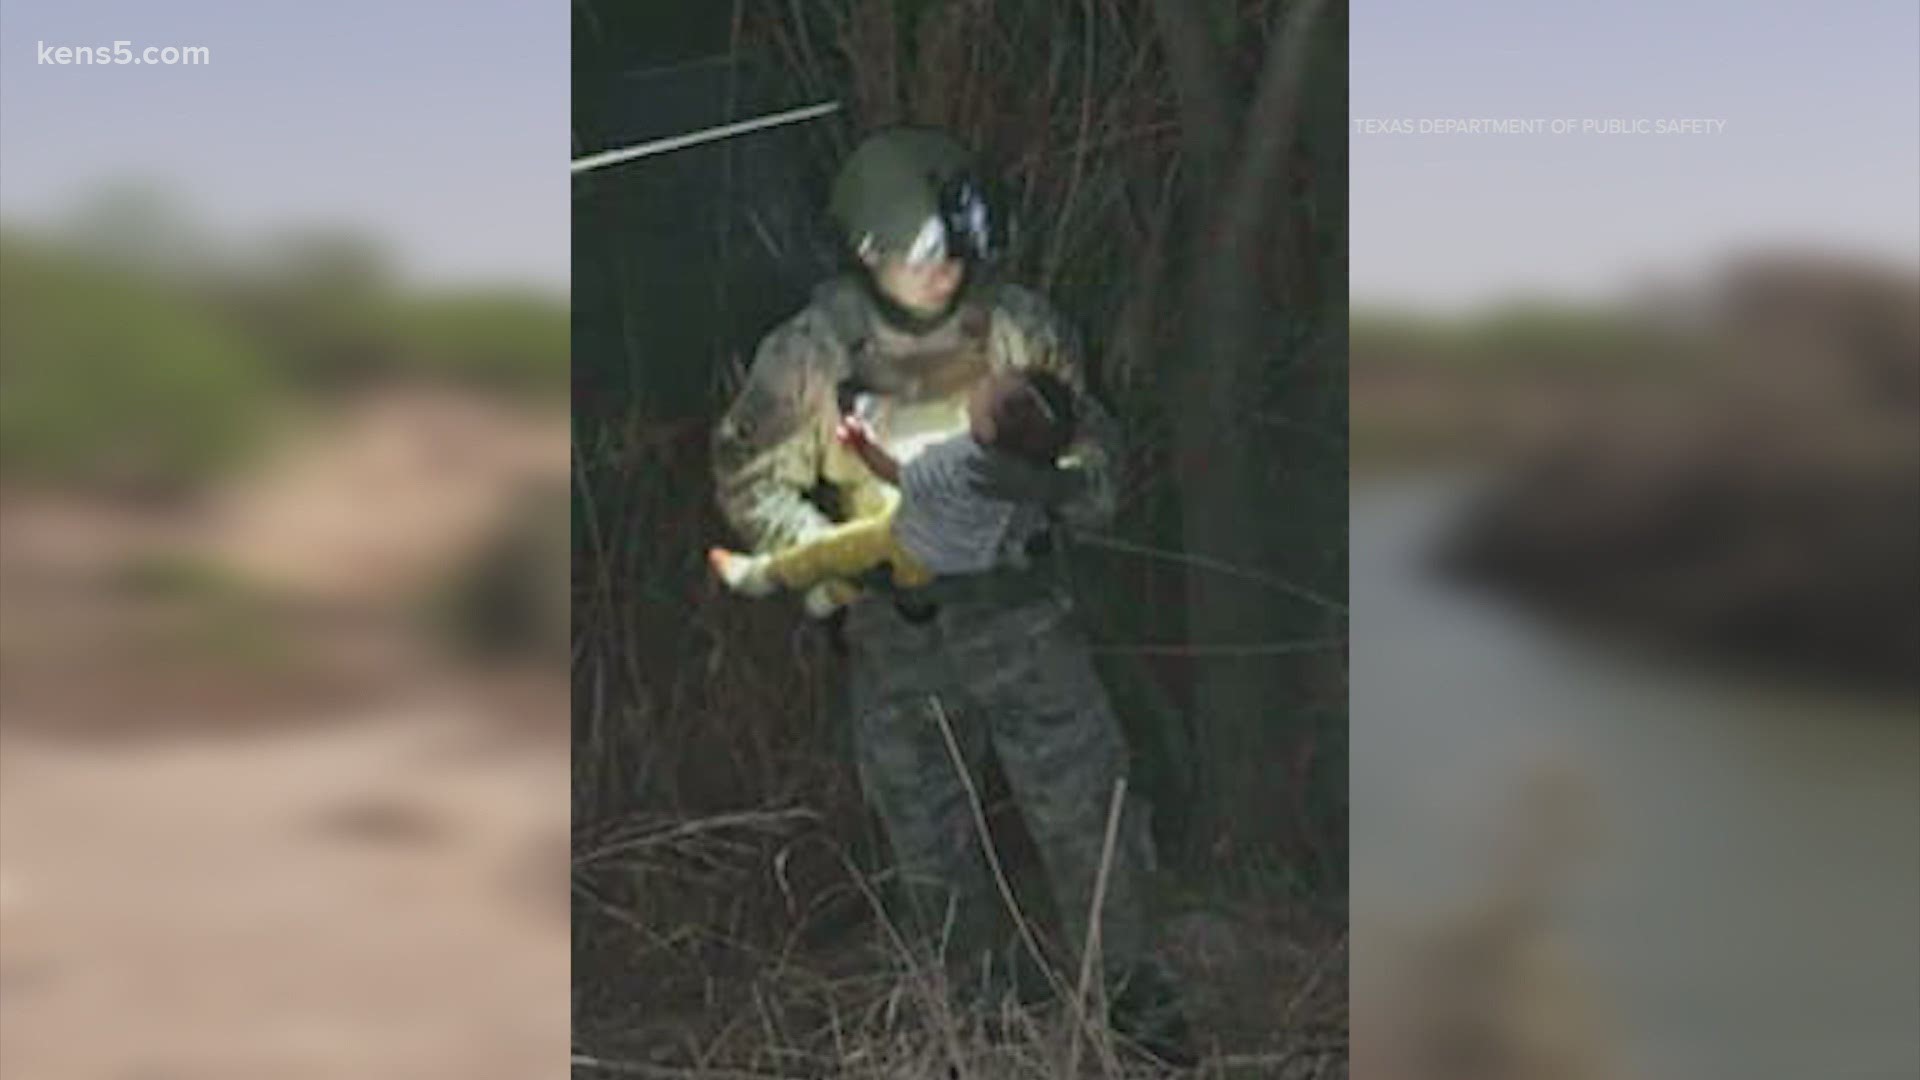 DPS troopers rescued a woman and baby from the banks of the Rio Grande two weeks ago. Here's the latest on the situation at the border.